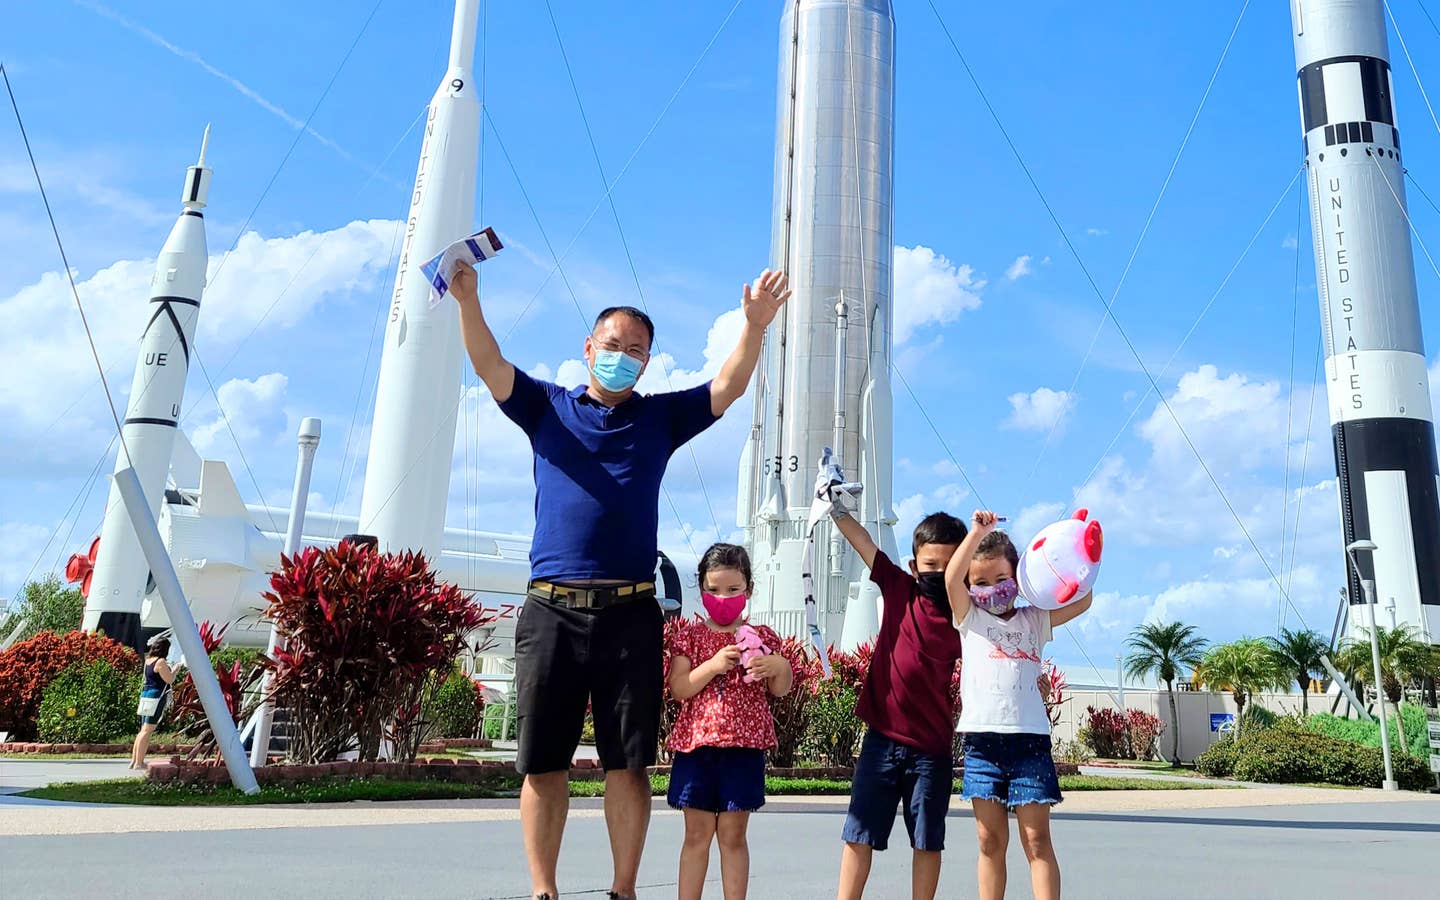 Featured Contributor, Angelica Kajiwara's husband and three children run pose in front of a 'Rocket Playground' located at the Kennedy Space Center™ Visitor Complex.